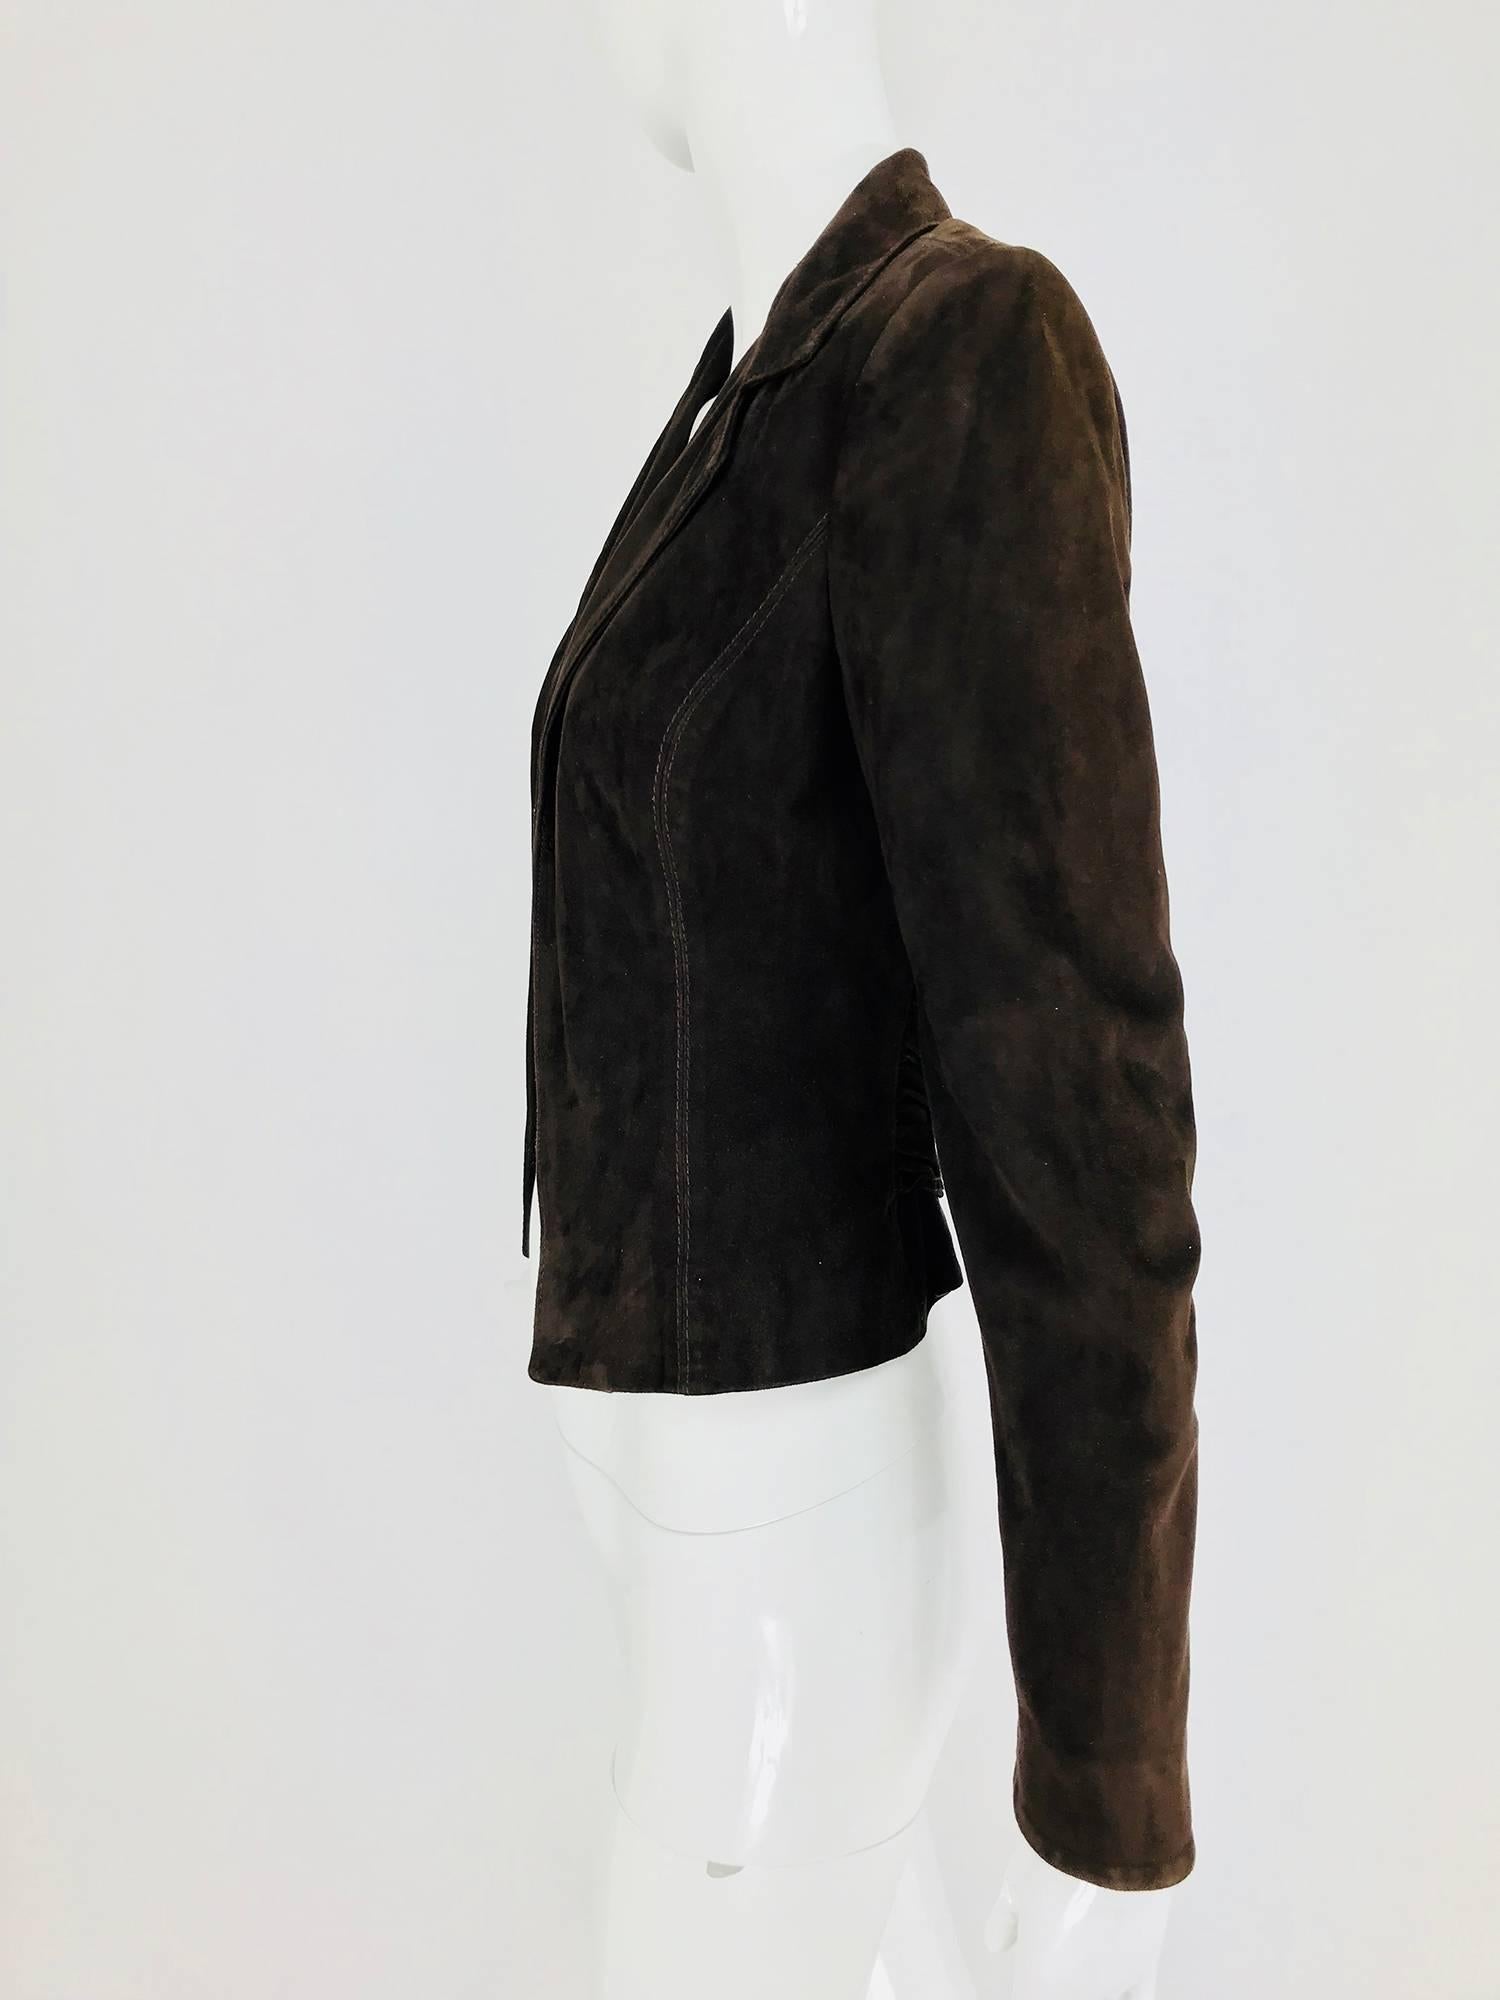 Valentino Chocolate brown top stitched suede jacket In Excellent Condition For Sale In West Palm Beach, FL